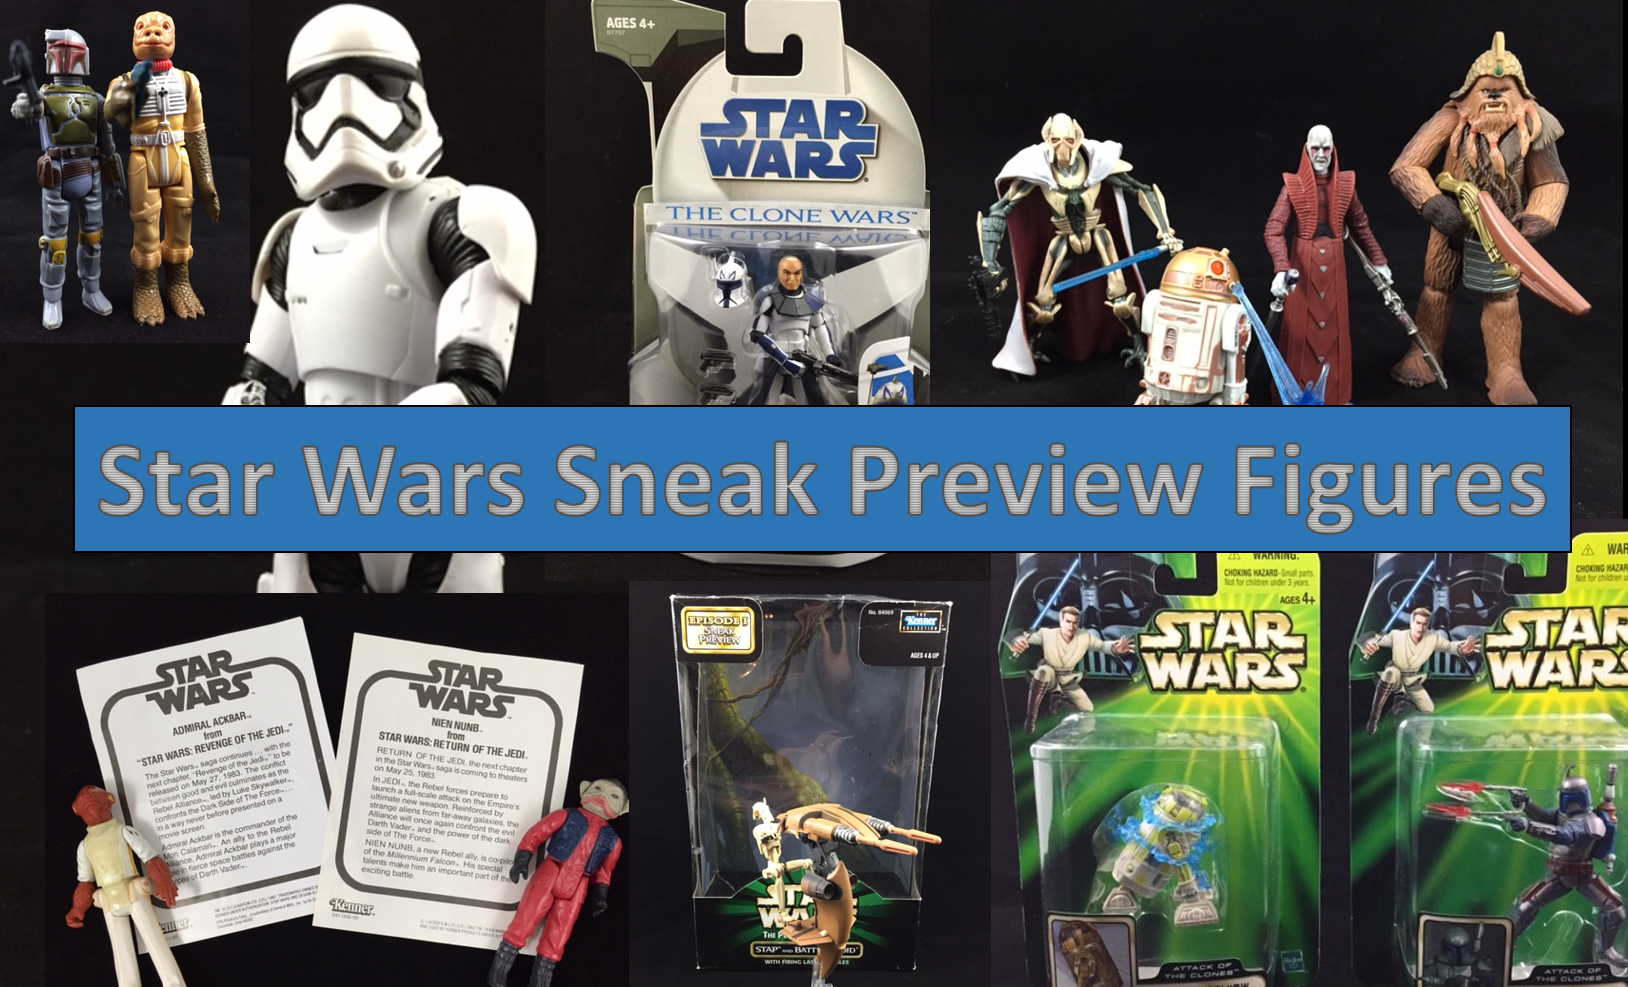 Star Wars Sneak Preview Figures – Then and Now